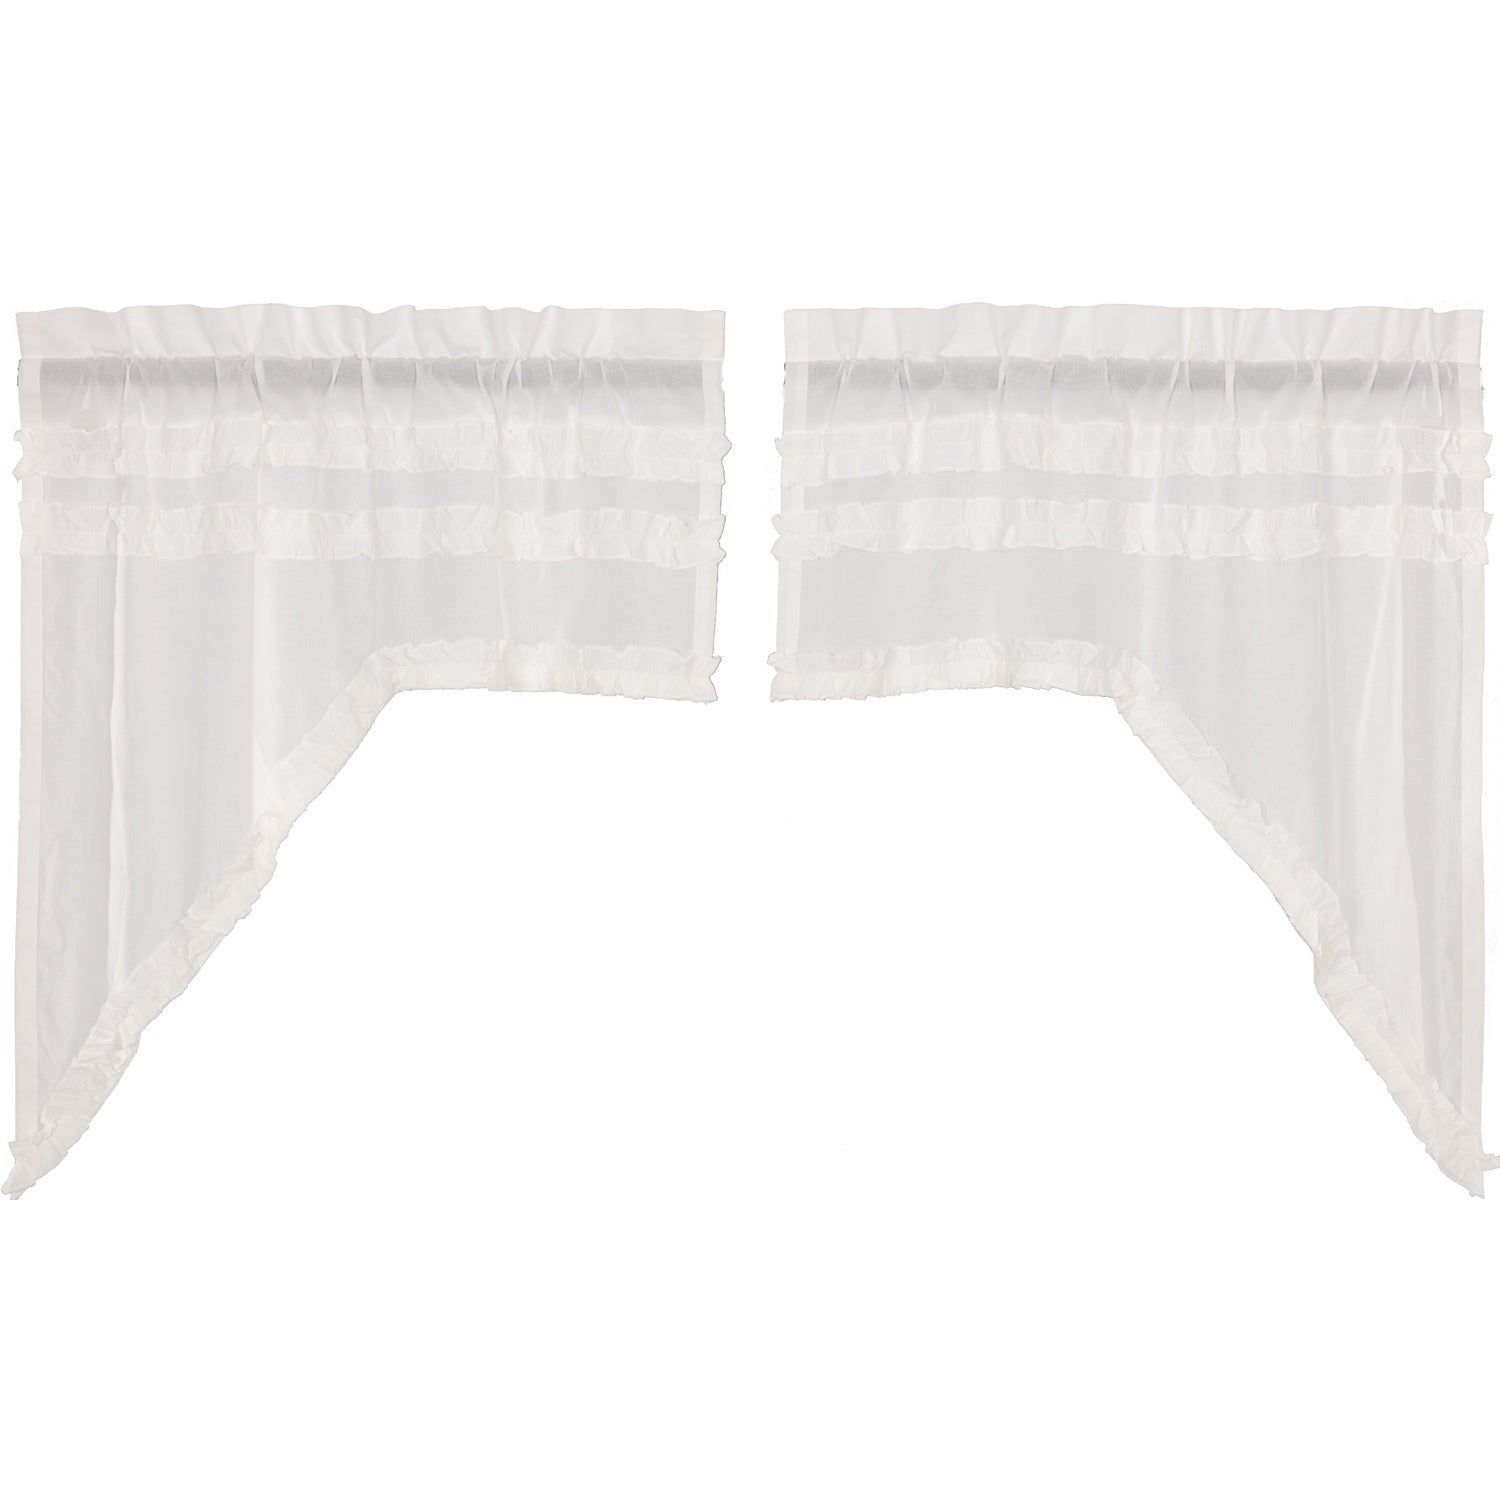 White Farmhouse Kitchen Curtains Vhc White Ruffled Sheer Petticoat Swag  Pair Rod Pocket Cotton Solid Color Ruched Ruffle With White Ruffled Sheer Petticoat Tier Pairs (Photo 3 of 20)